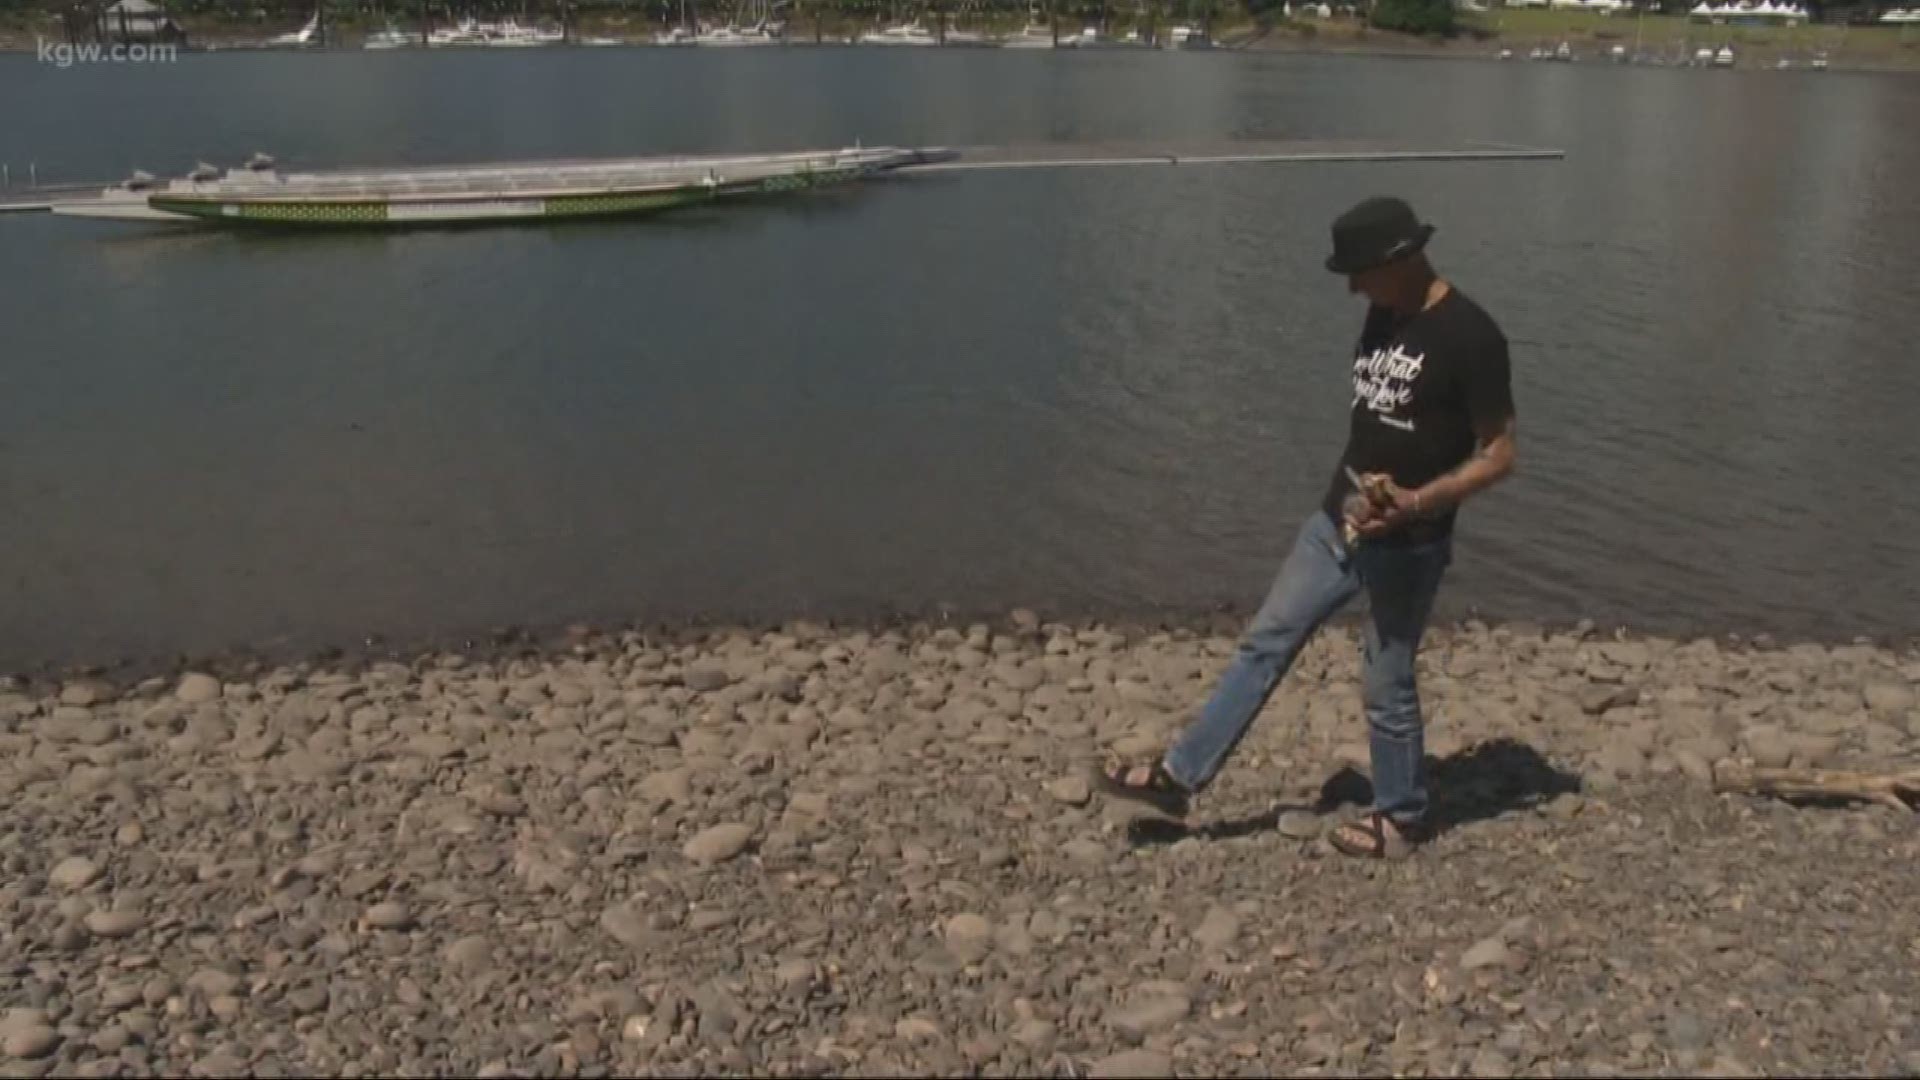 The homeless community helped clean a beach along the Willamette River.